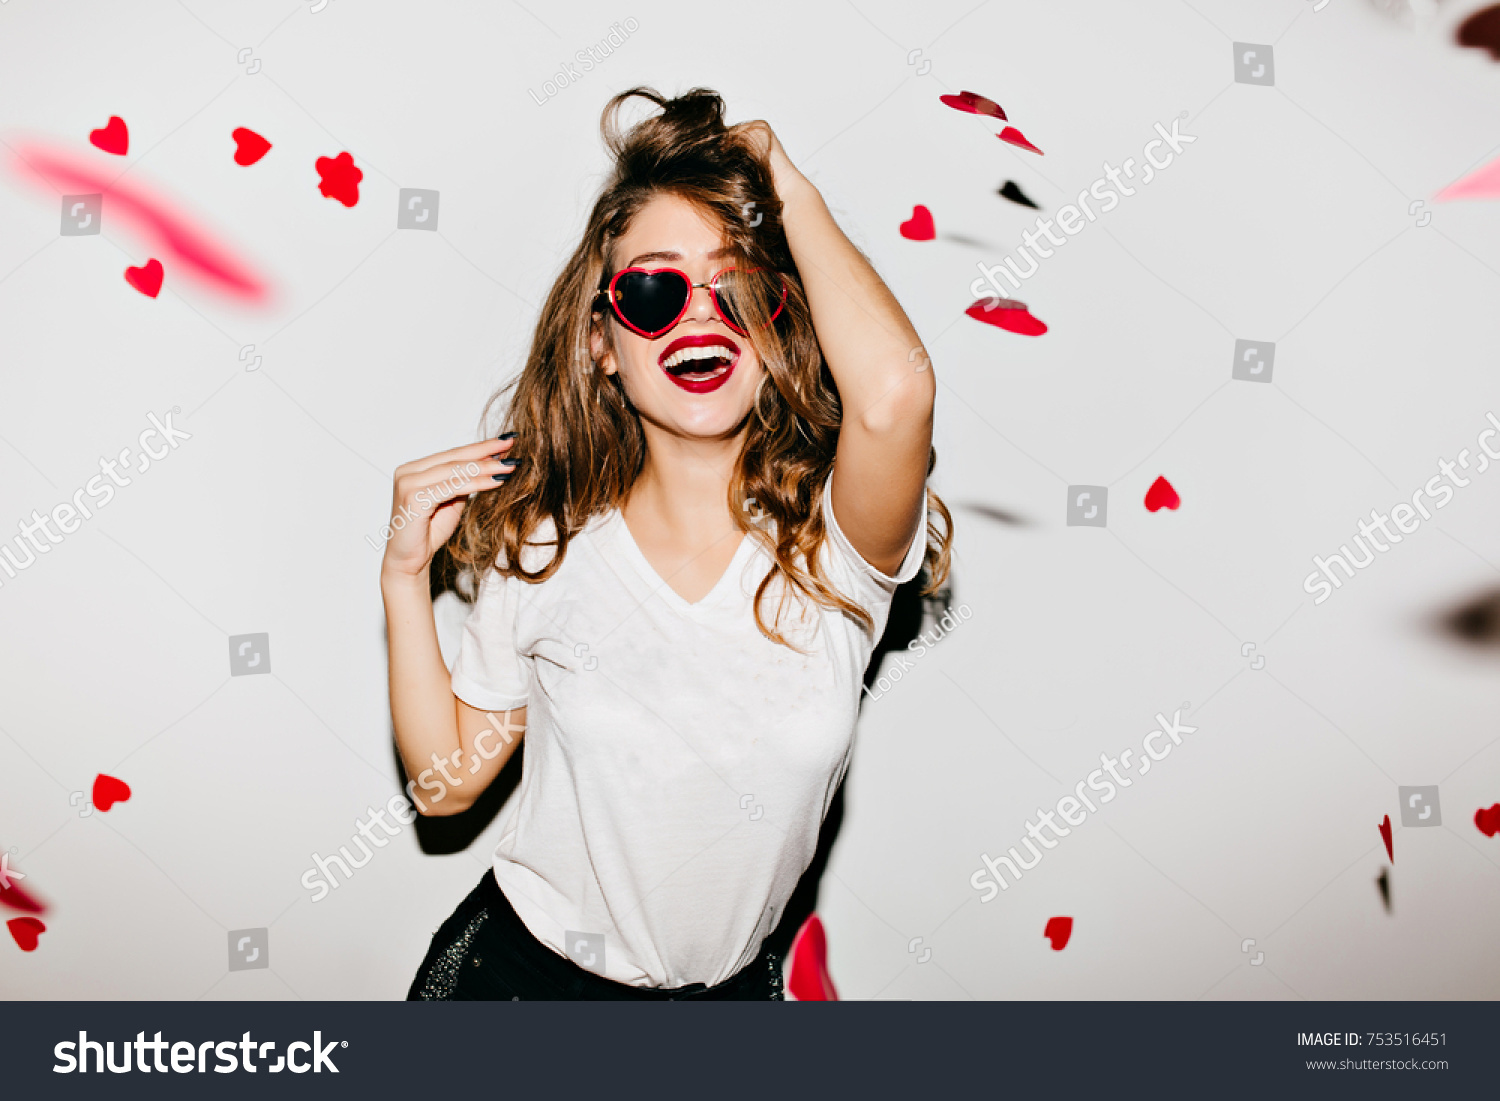 Indoor portrait of amazing caucasian female model in trendy t-shirt touching her long shiny hair. Laughing refined woman in sunglasses having fun with red confetti. #753516451